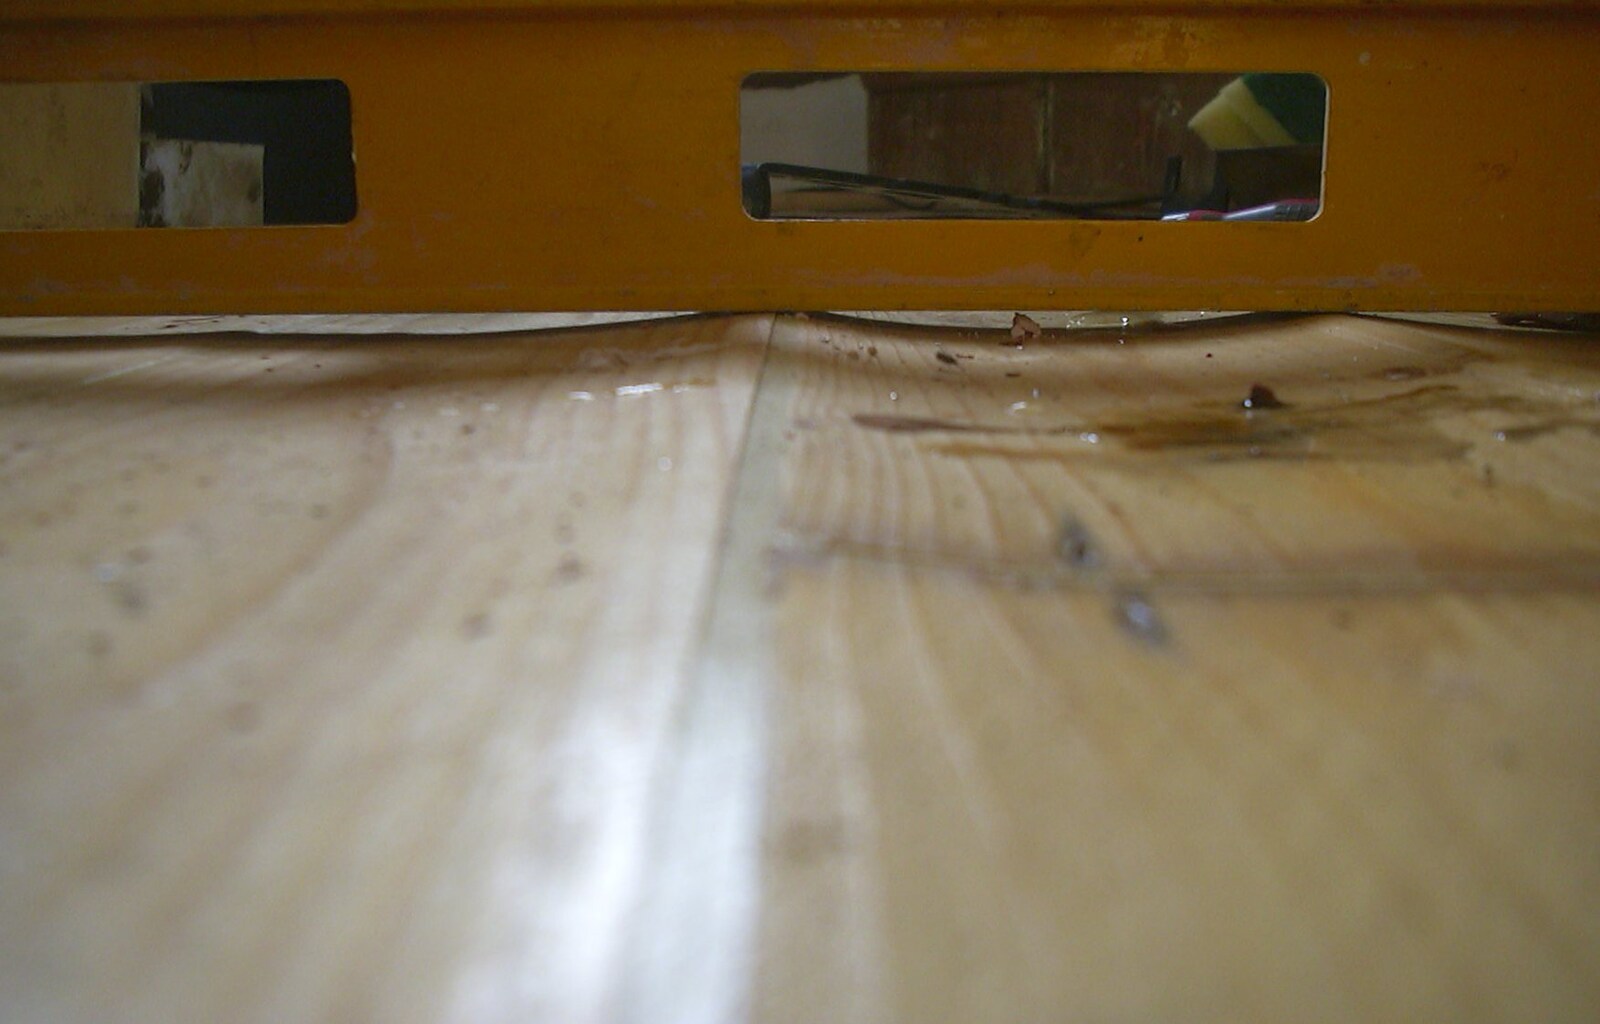 The floorboards have become very warped from Bathroom Rebuilding, Brome, Suffolk - 1st February 2002